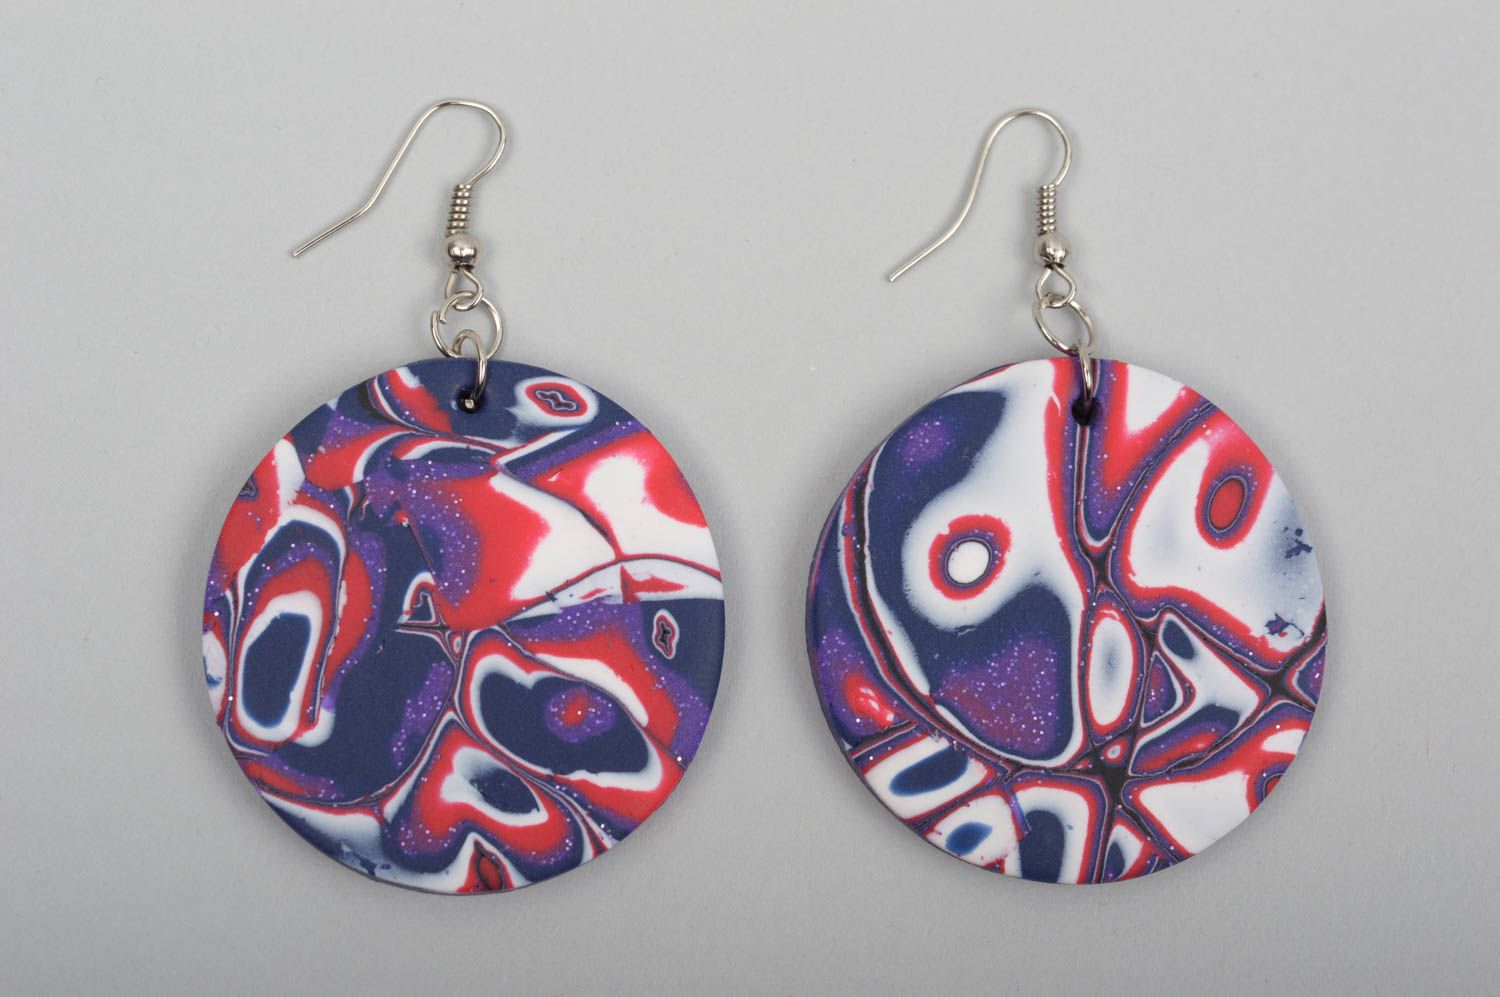 Handmade earrings designer jewelry polymer clay stylish earrings gifts for her photo 1